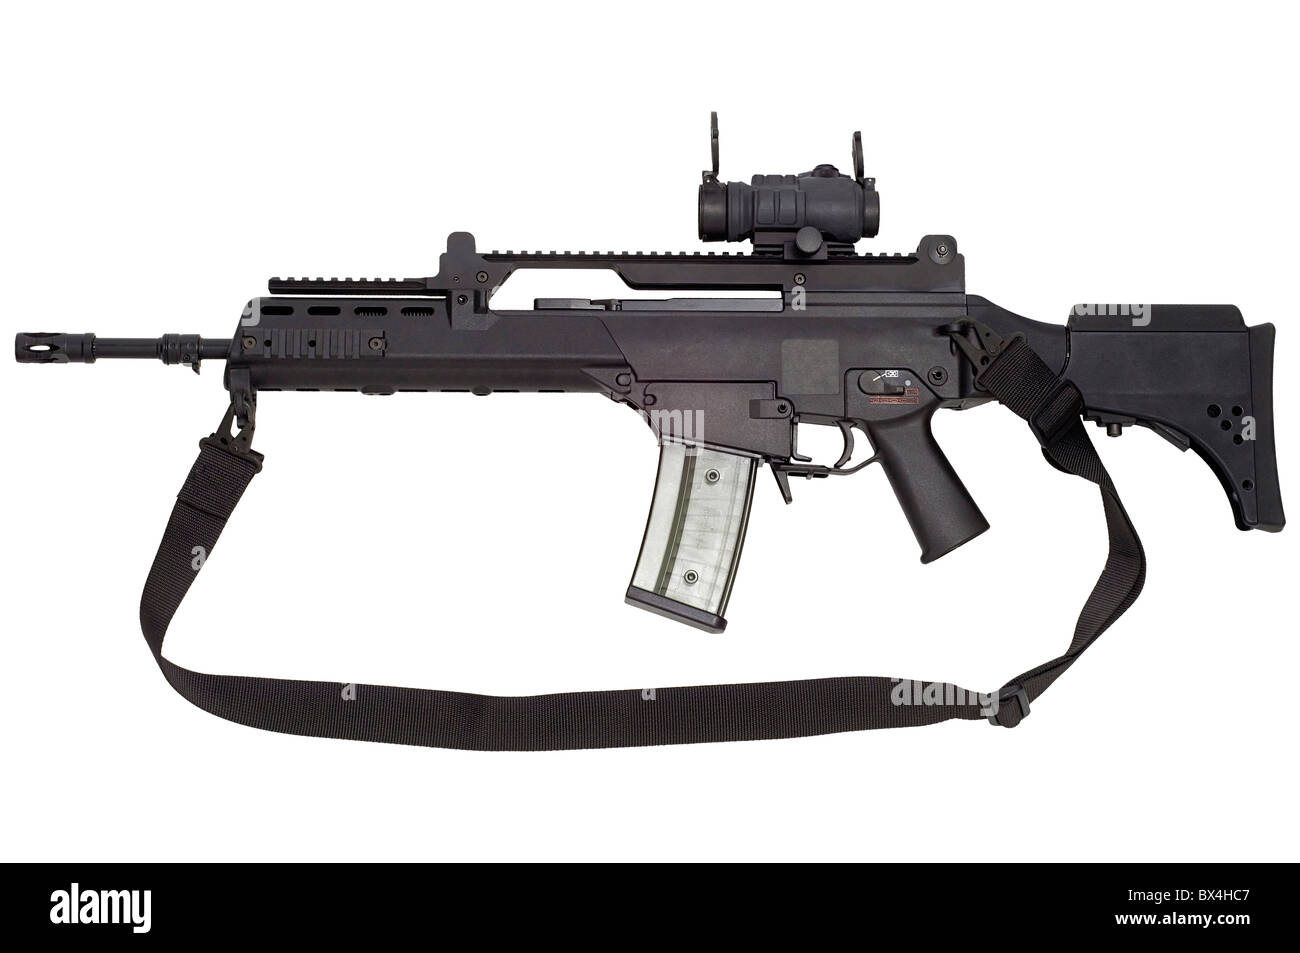 Advanced automatic weapon G36 in armament of NATO and German army. Stock Photo